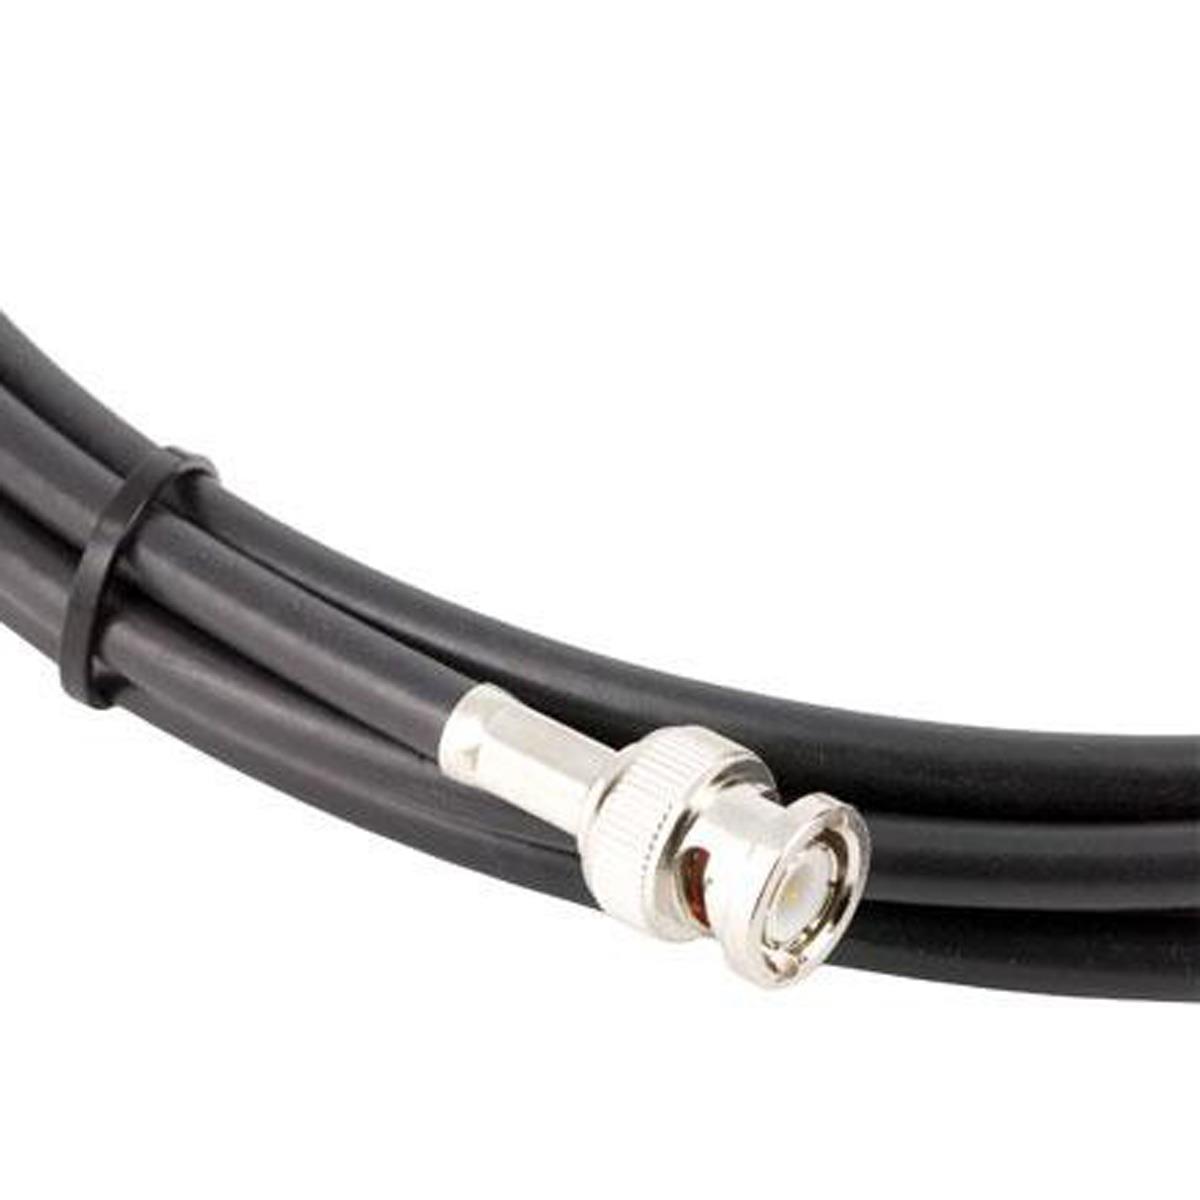 Image of Lectrosonics ARG15 15' Coaxial Cable for Remote Antennas